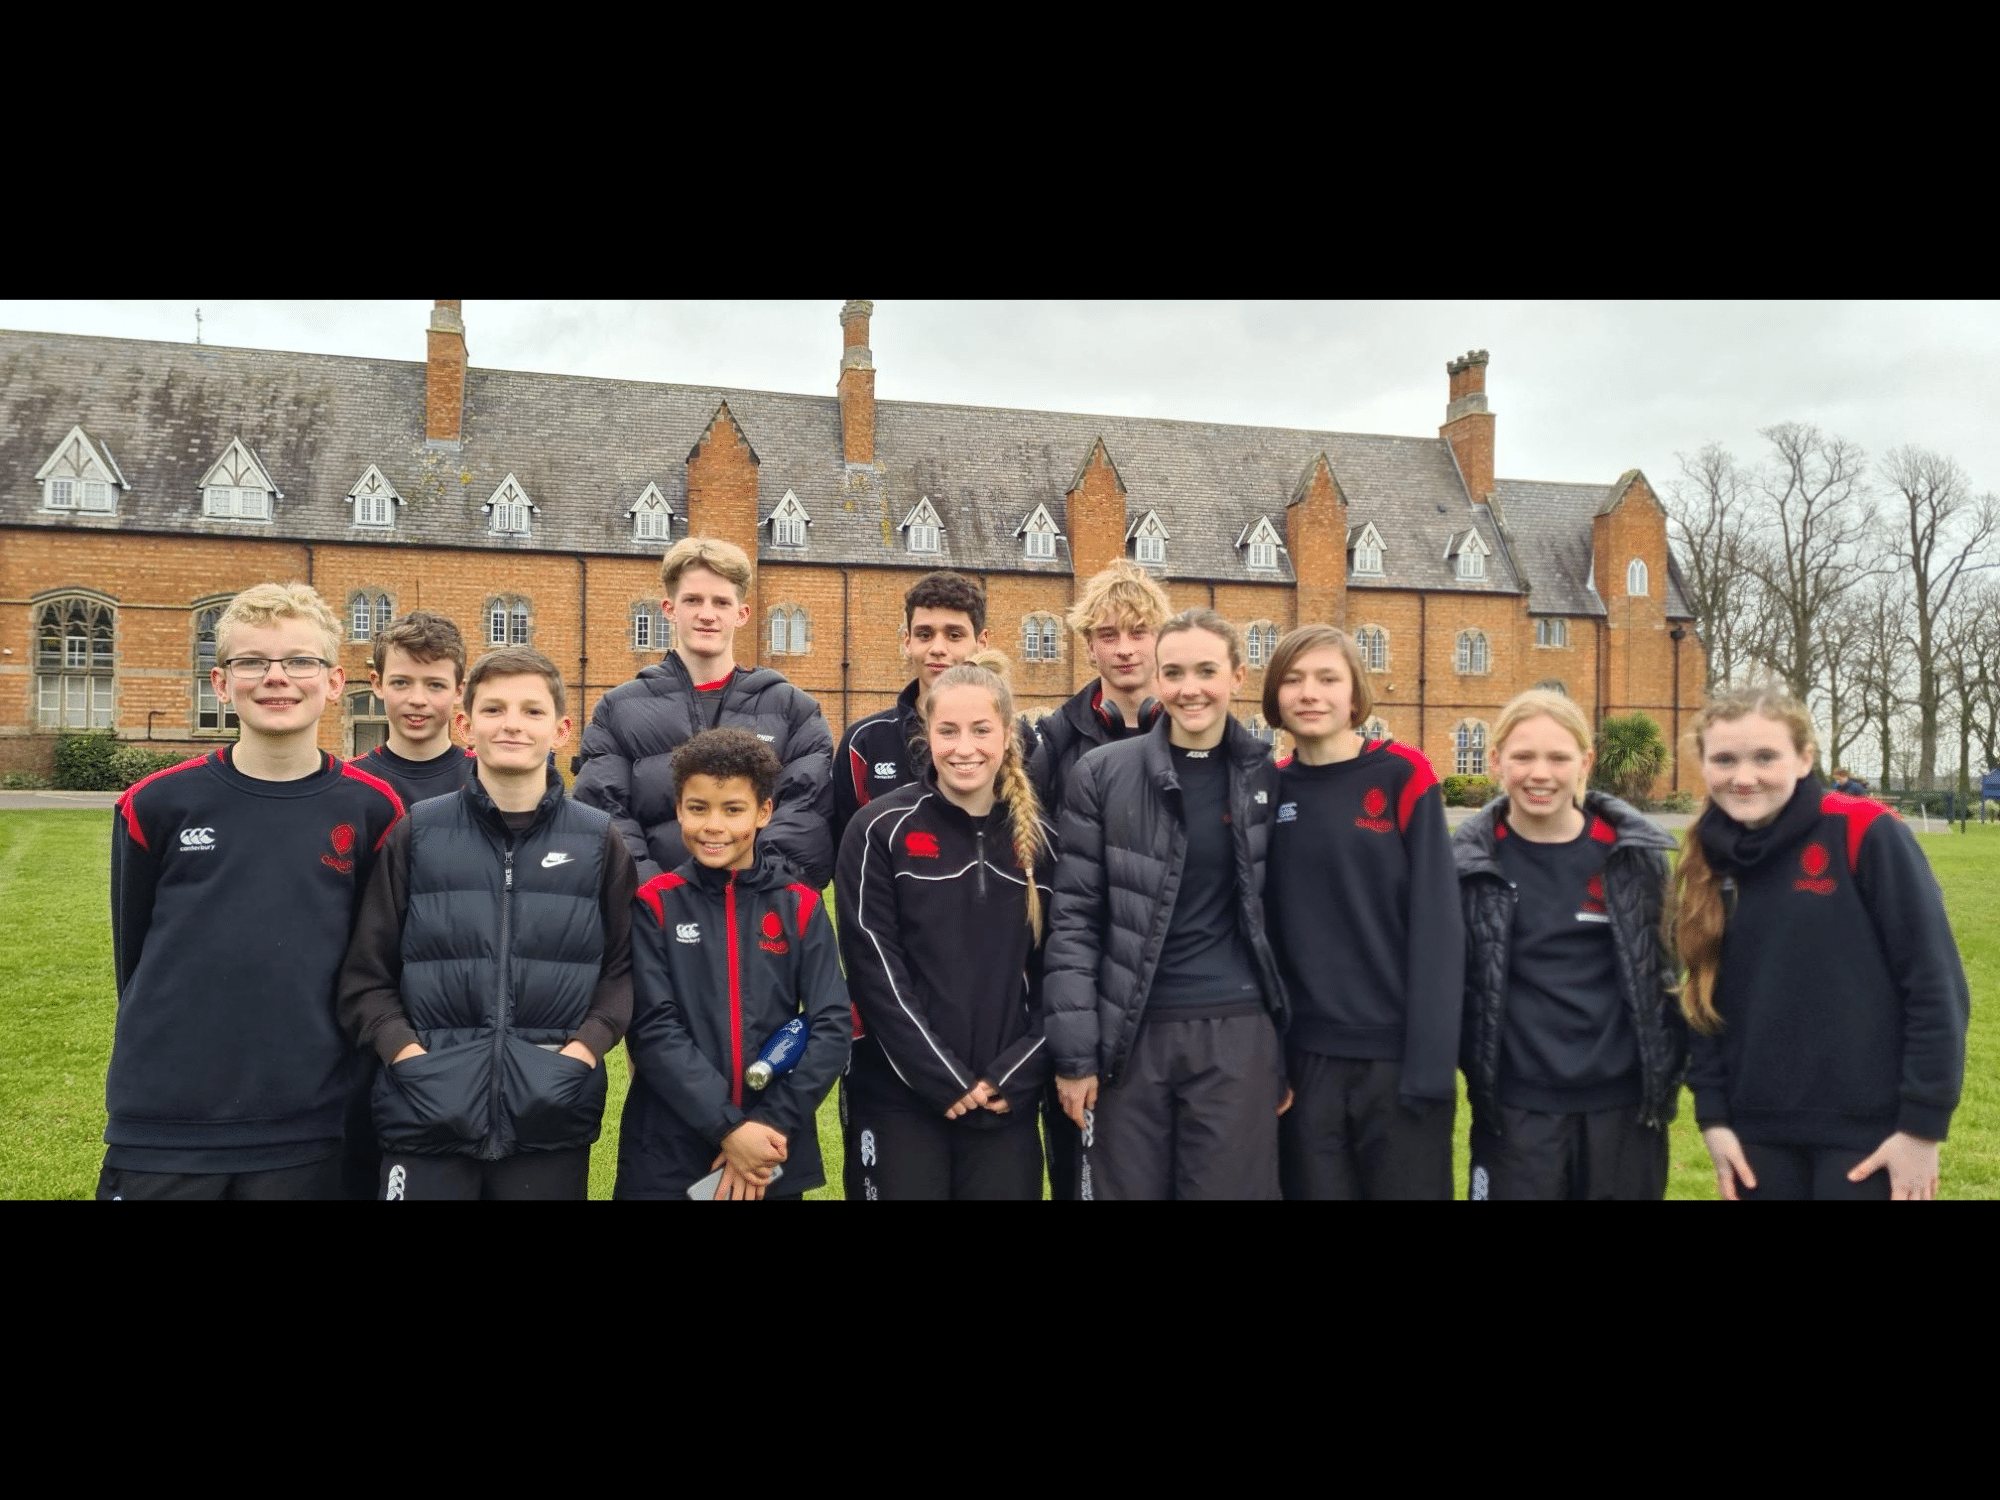 Pupils wearing black and red standing in front of School after running Cross Country